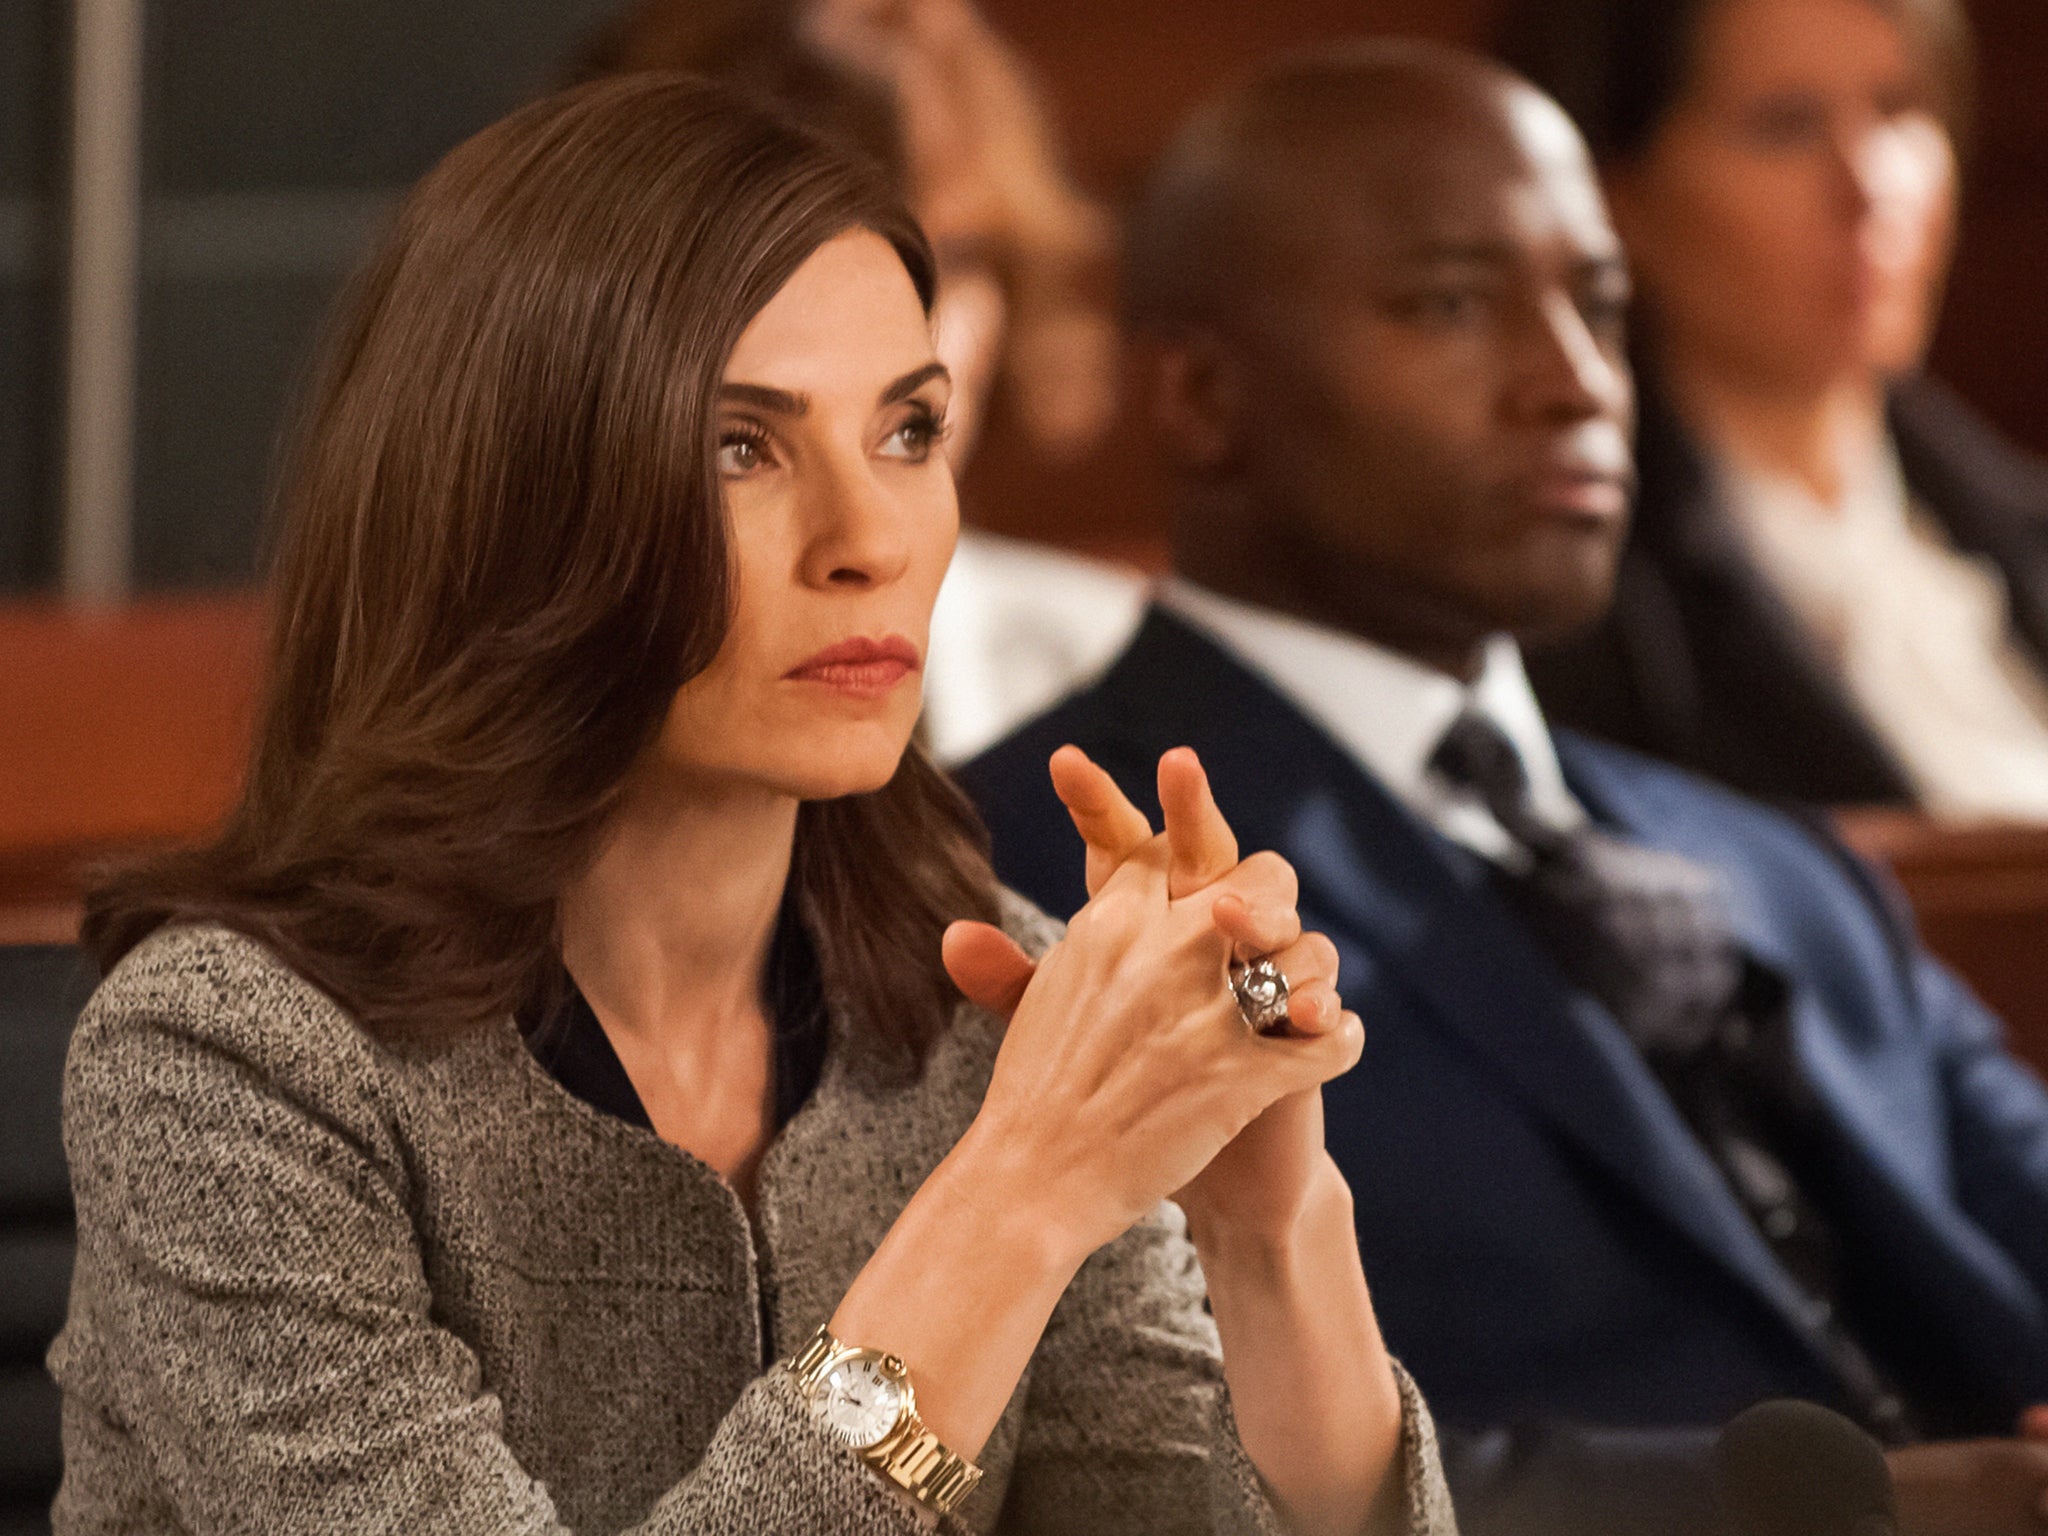 The Good Wife has been consistently good for long enough to justify an occasional lapse